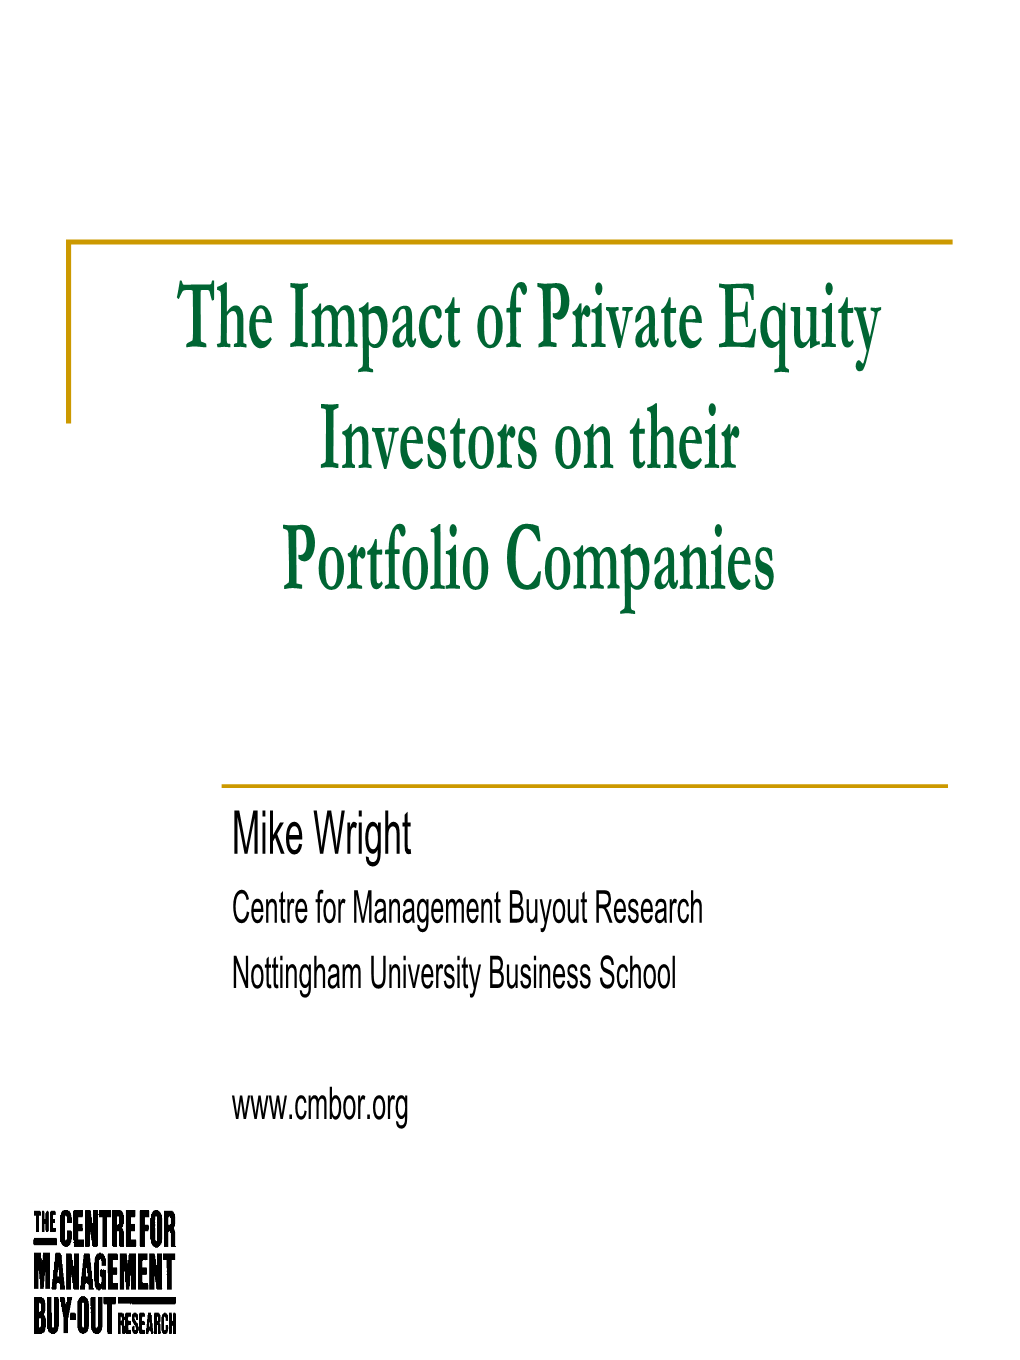 The Impact of Private Equity Investors on Their Portfolio Companies